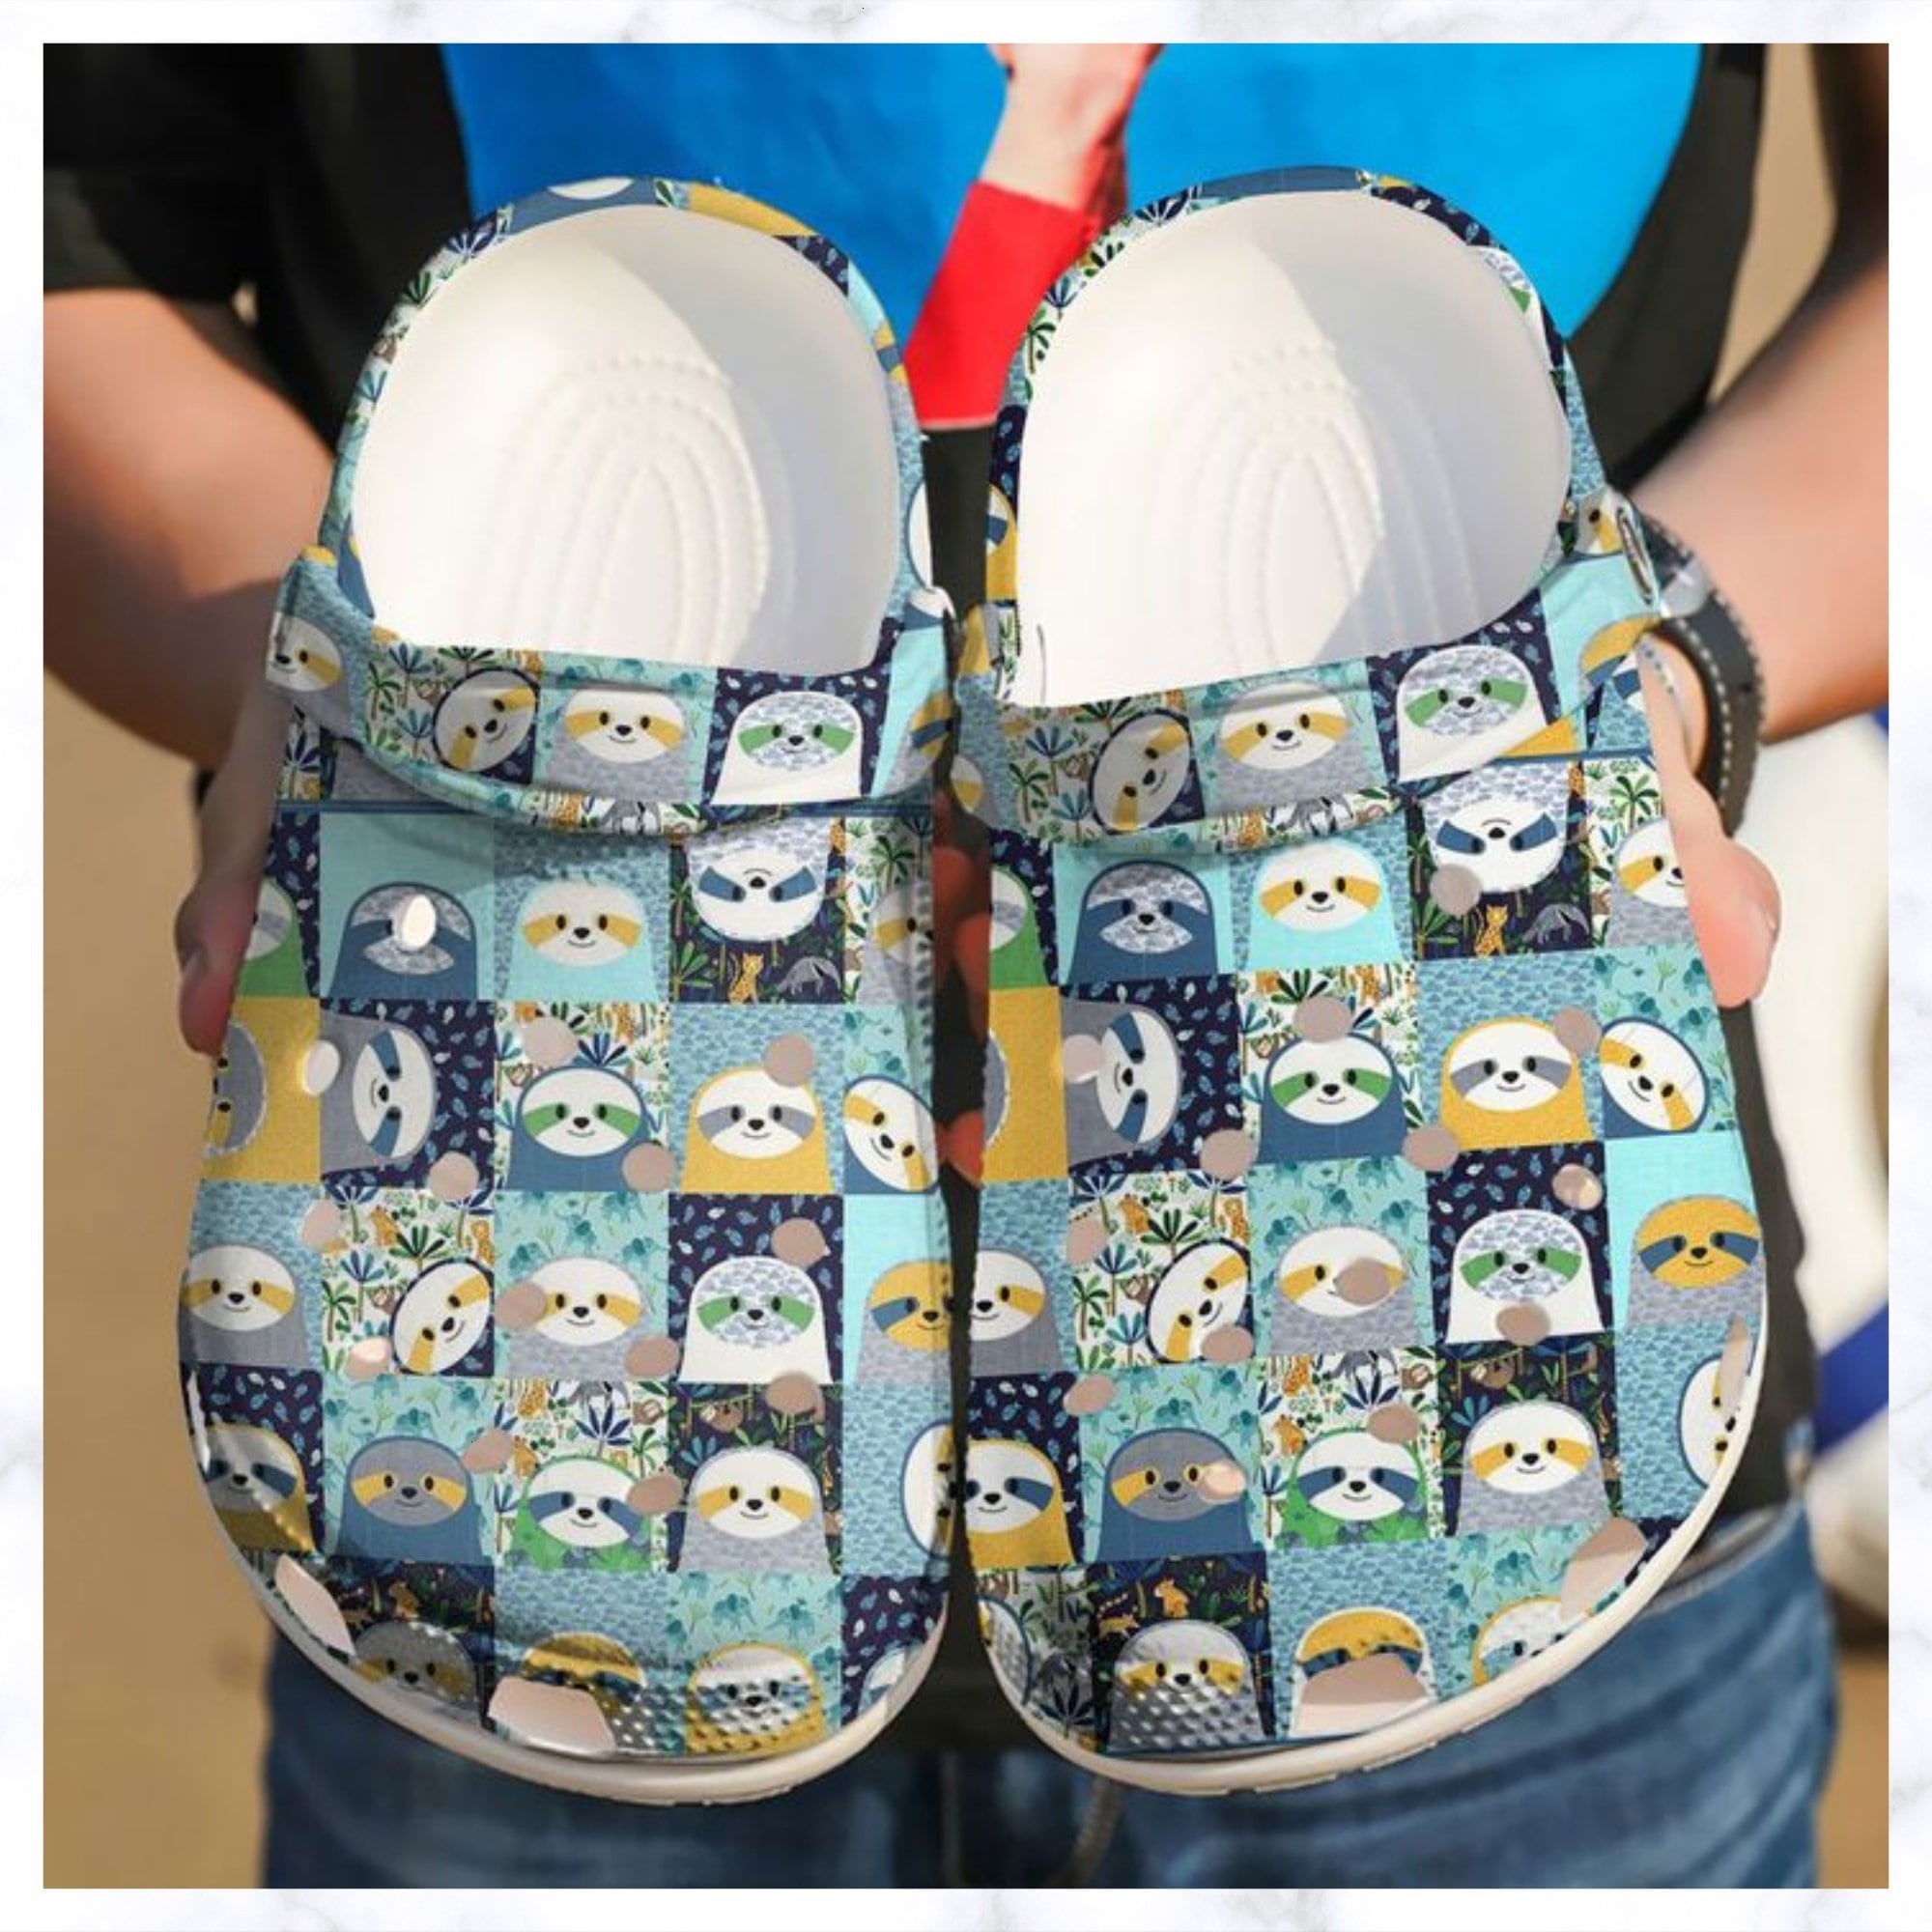 Customized Comfy Sloth Clogs for Him/Her